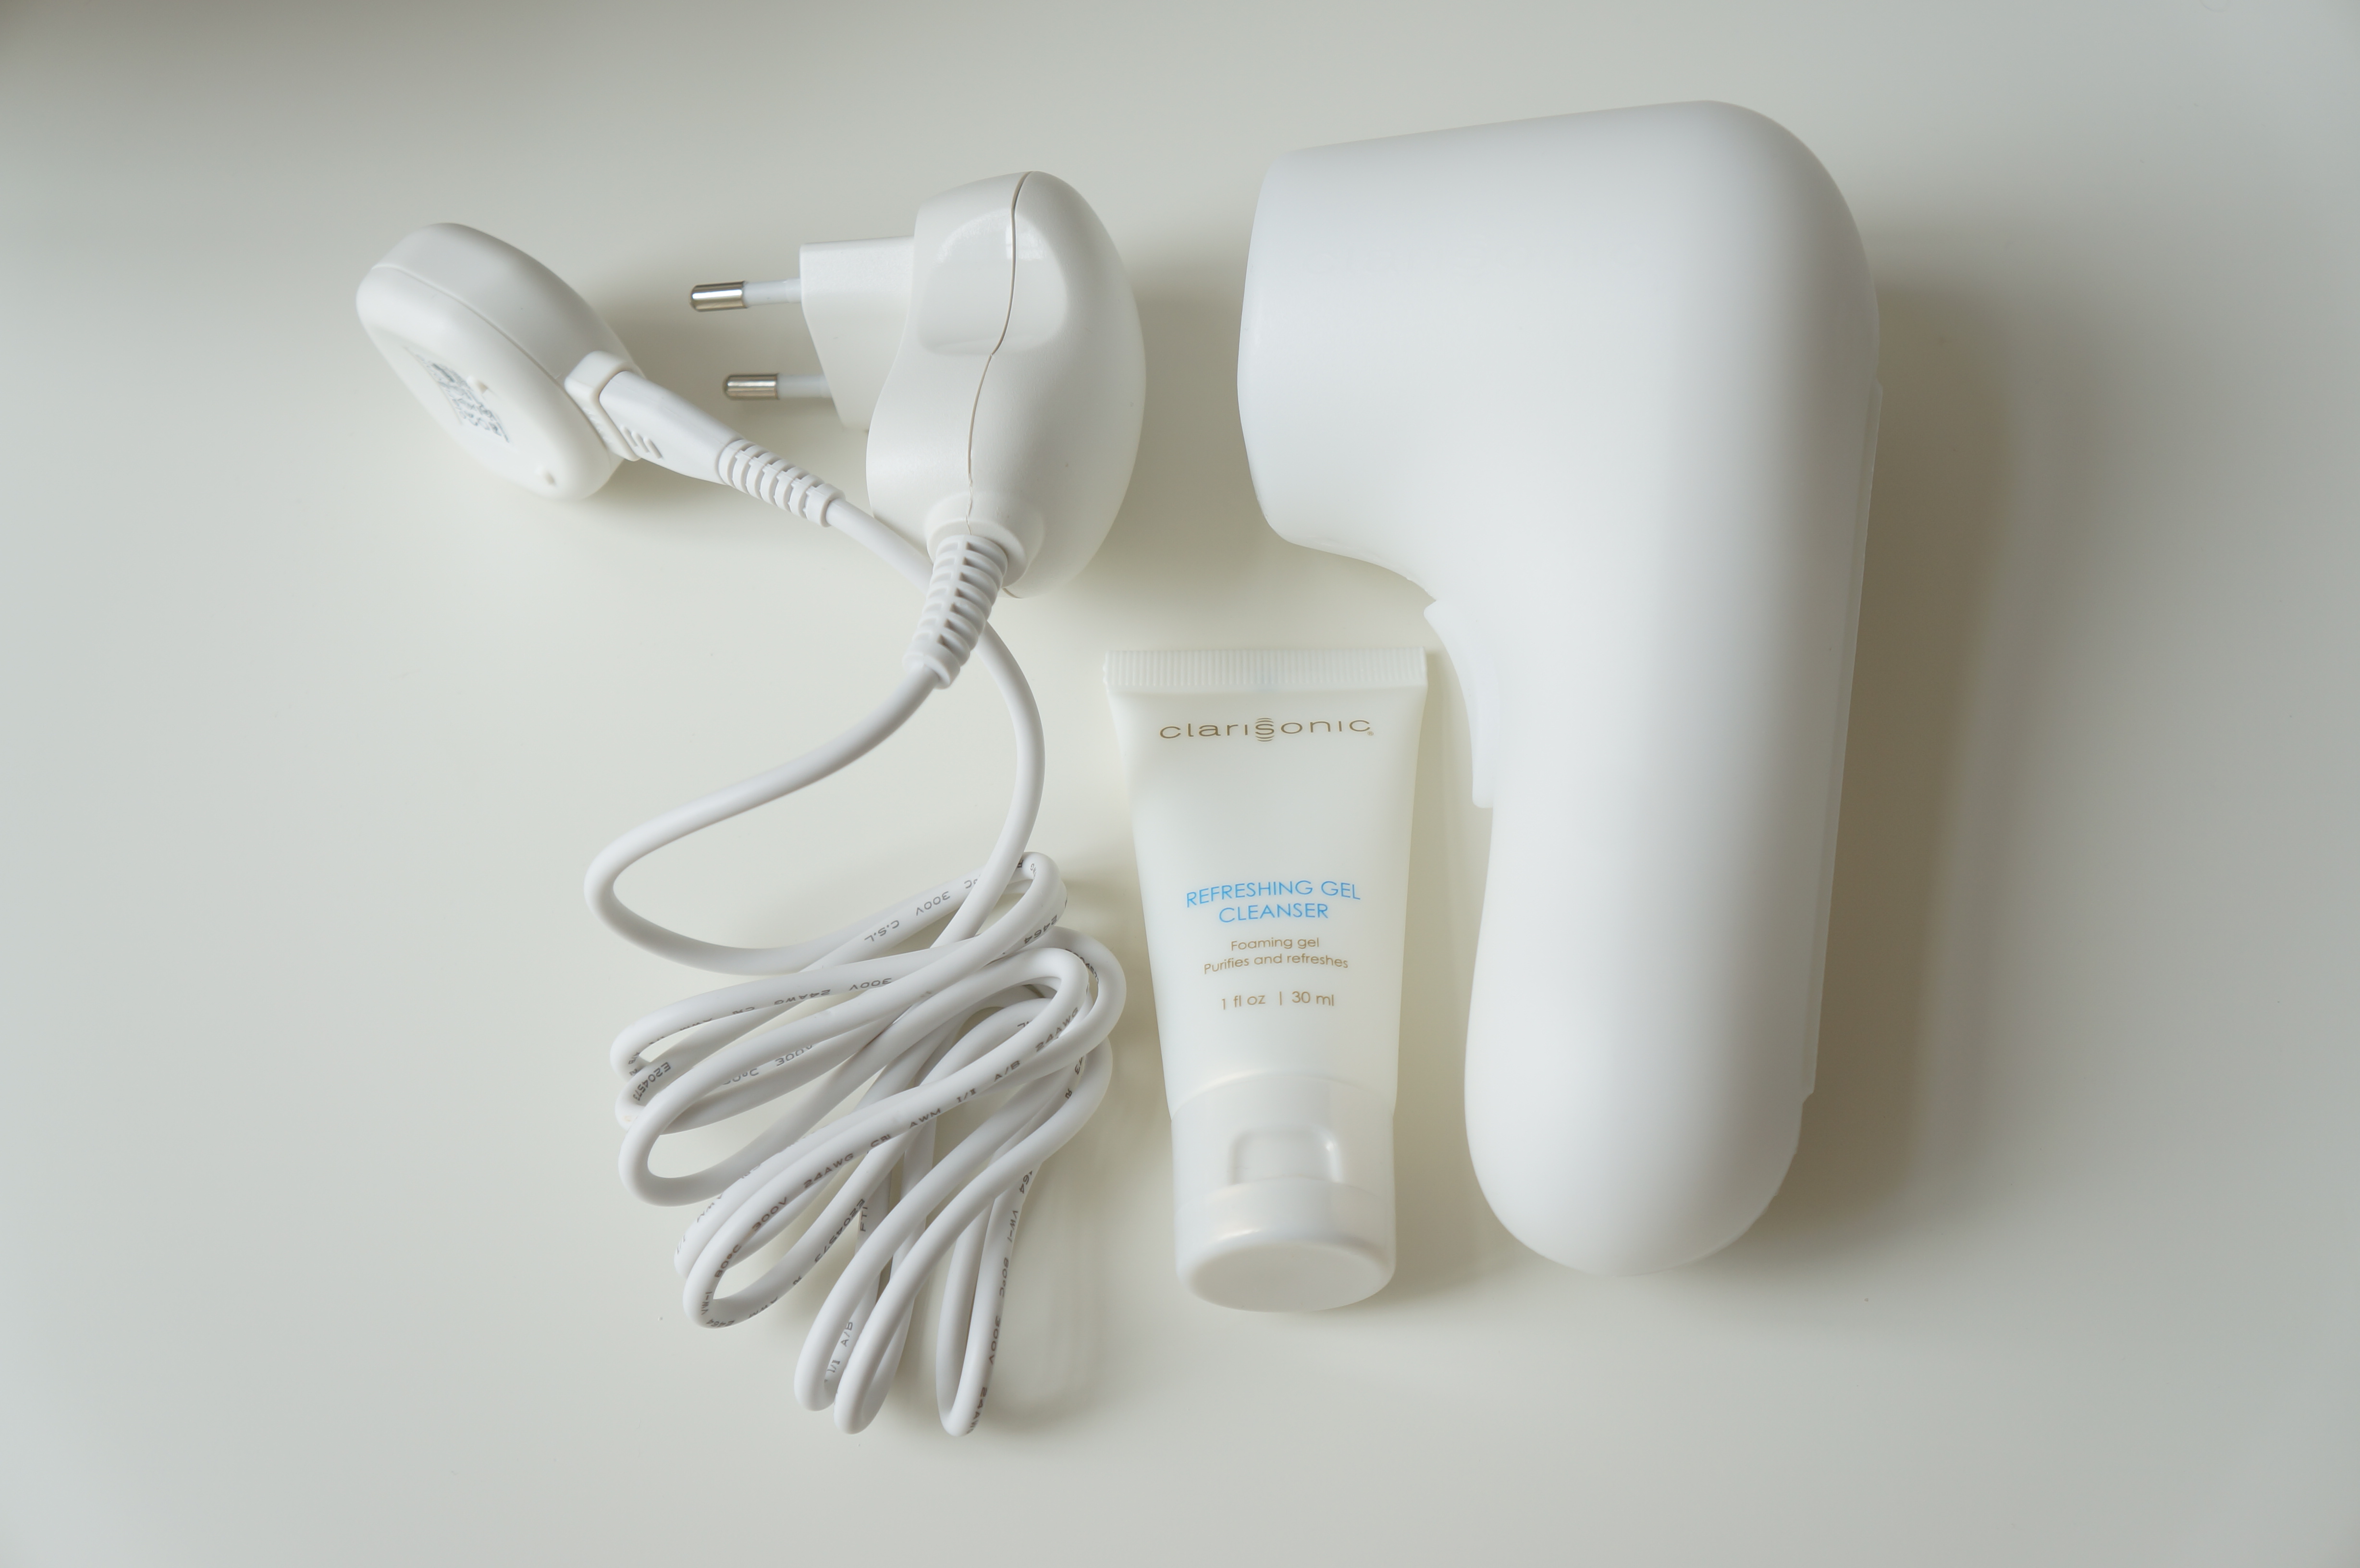 Clarisonic Mia 2 which comes in a handy travel box/ Pic by kiwikoo